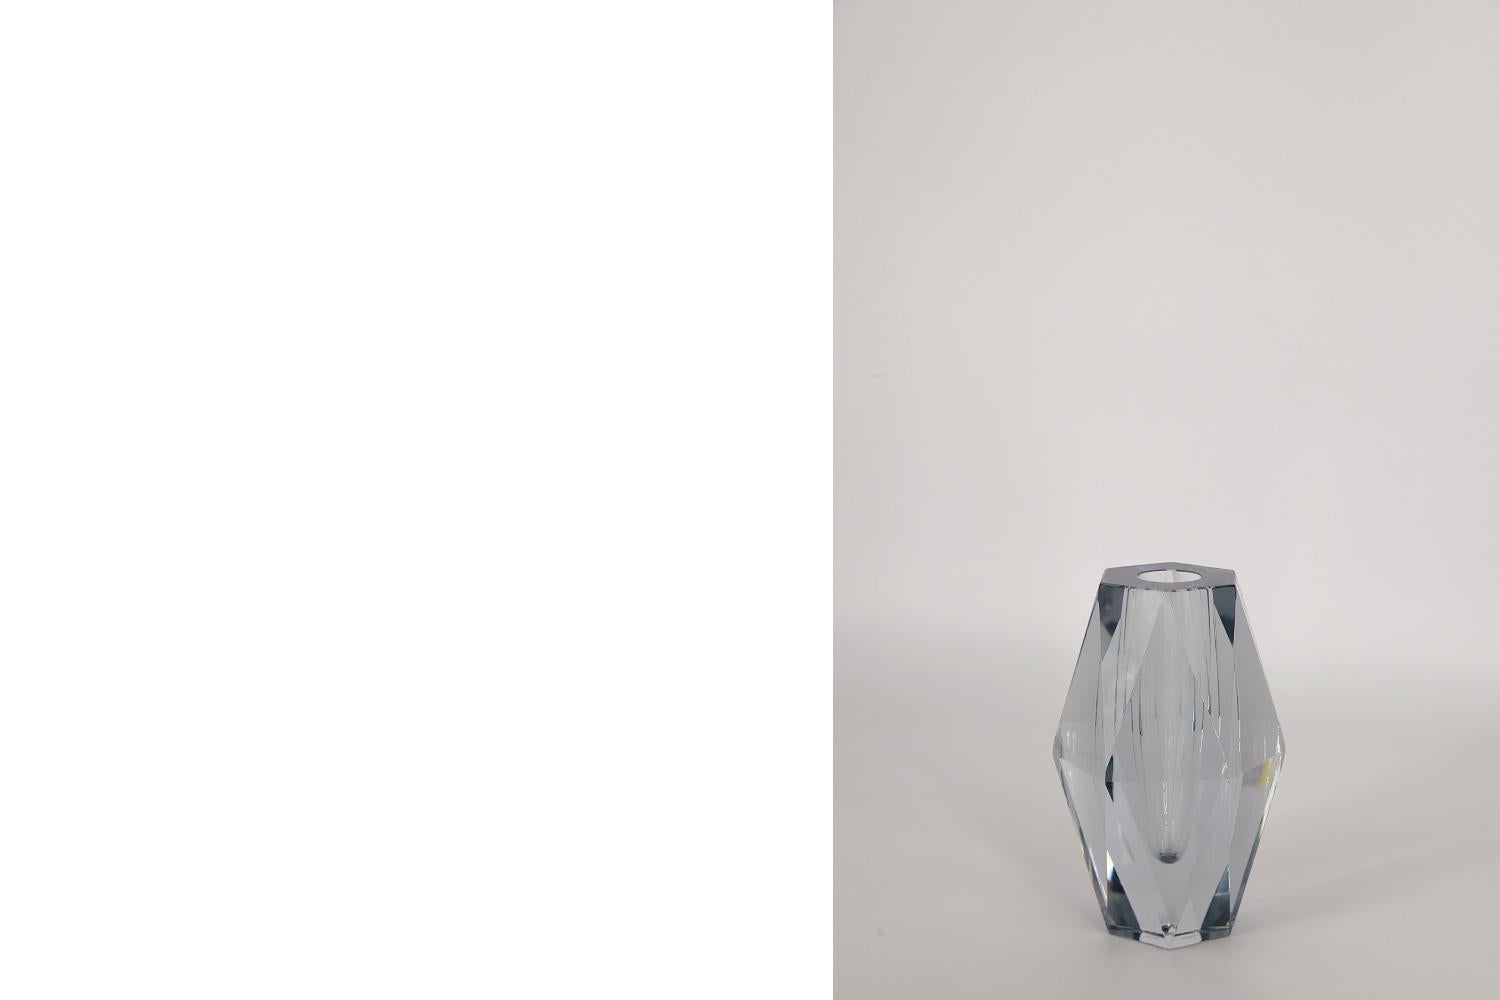 This Diamond glass vase was designed by Asta Strömberg for the Swedish glass factory Strömbergshyttan during the 1960s. The vase is made of high-quality ice-blue thick glass. It creates very interesting visual effects due to the refraction of light